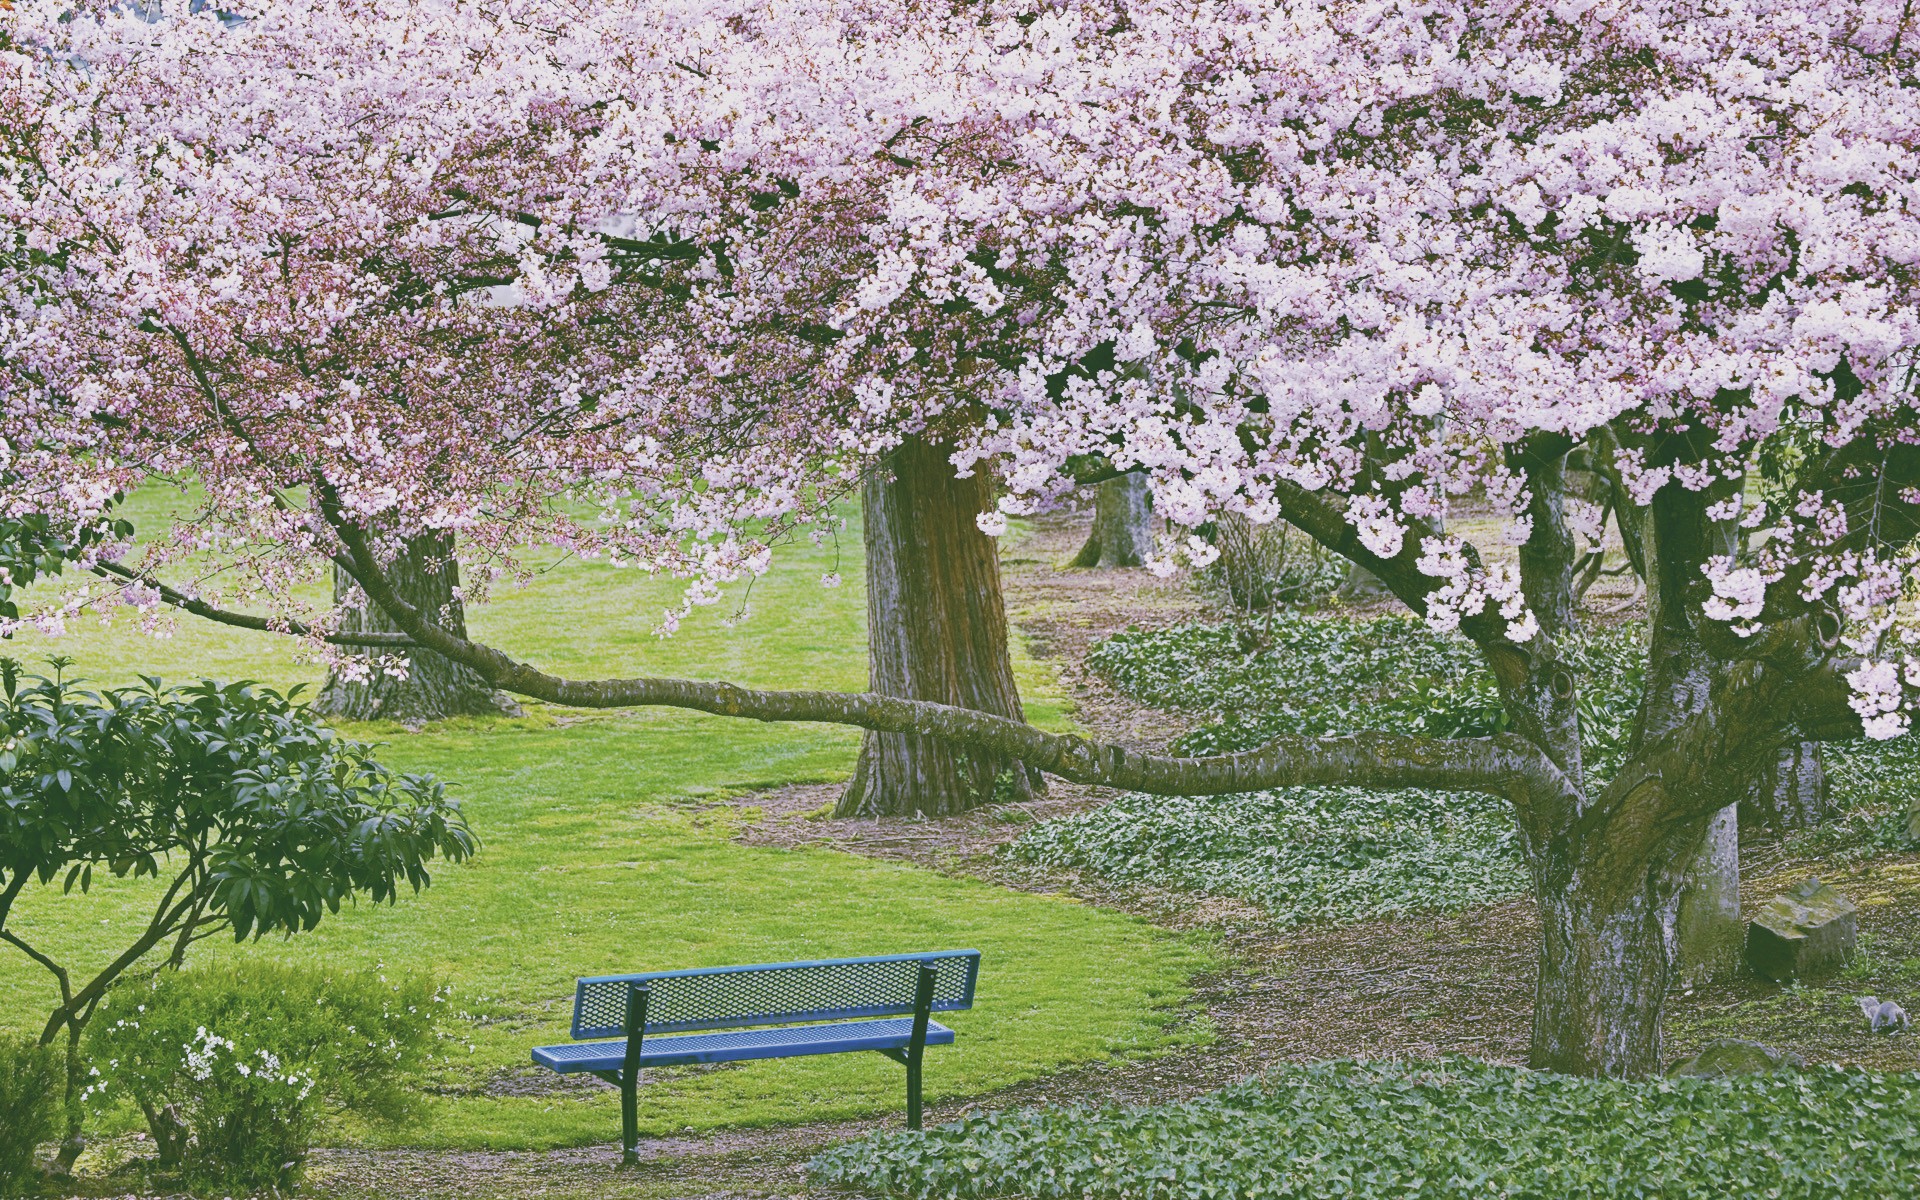 General 1920x1200 park bench spring blossoms trees cherry blossom